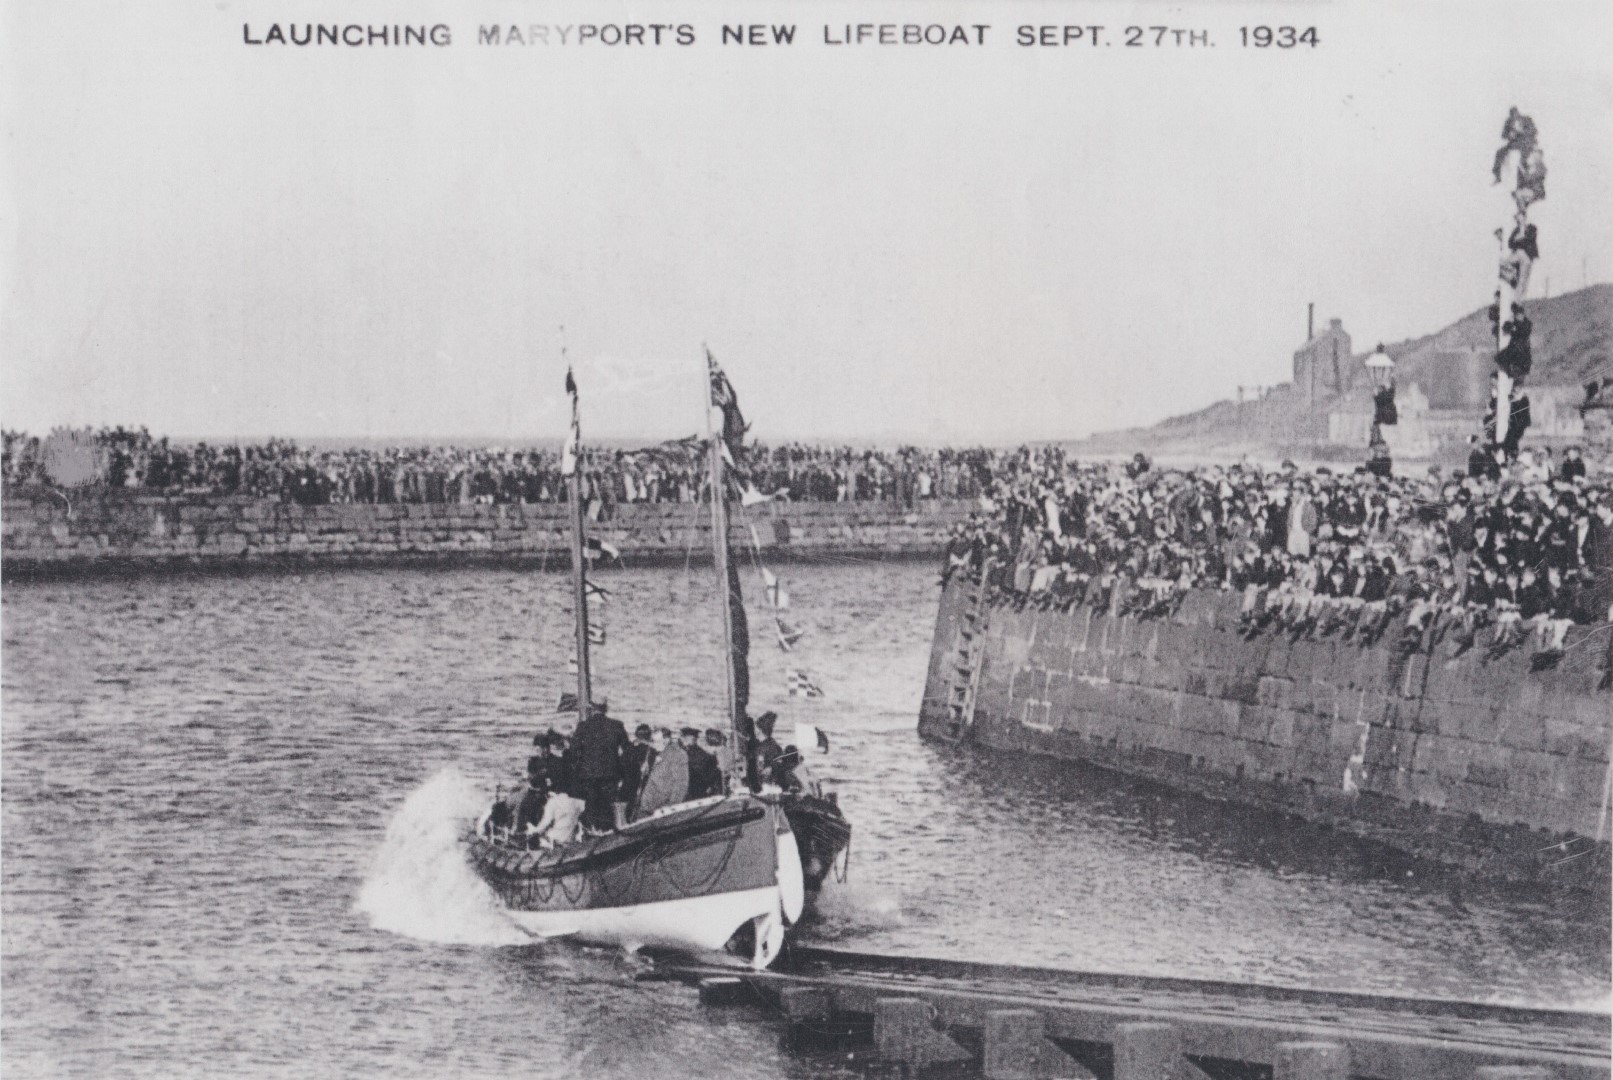 Maryport harbour lifeboat launch huge crowds Sept 27th 1934